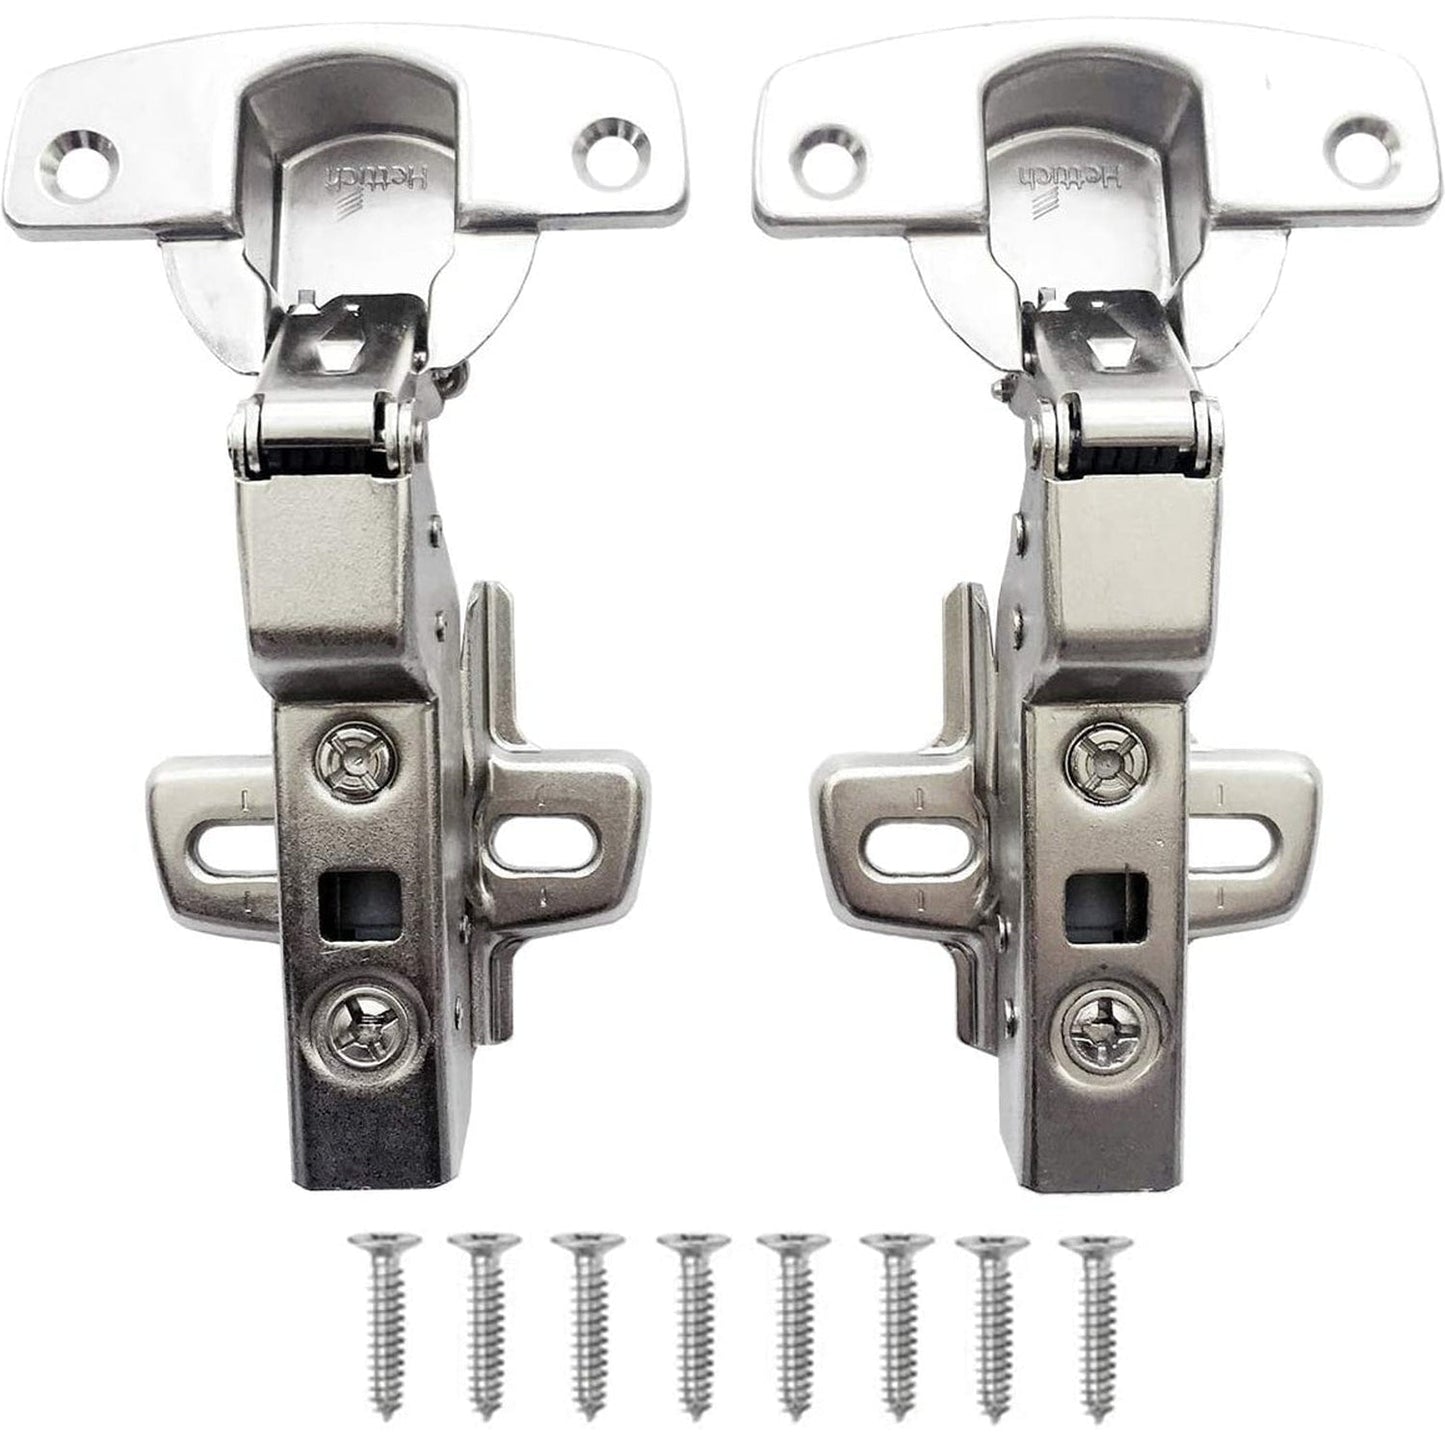 Hettich Sensys 8645i 110° Inset Soft Close Hinge & Mounting Plate TH52 (2 Pack)